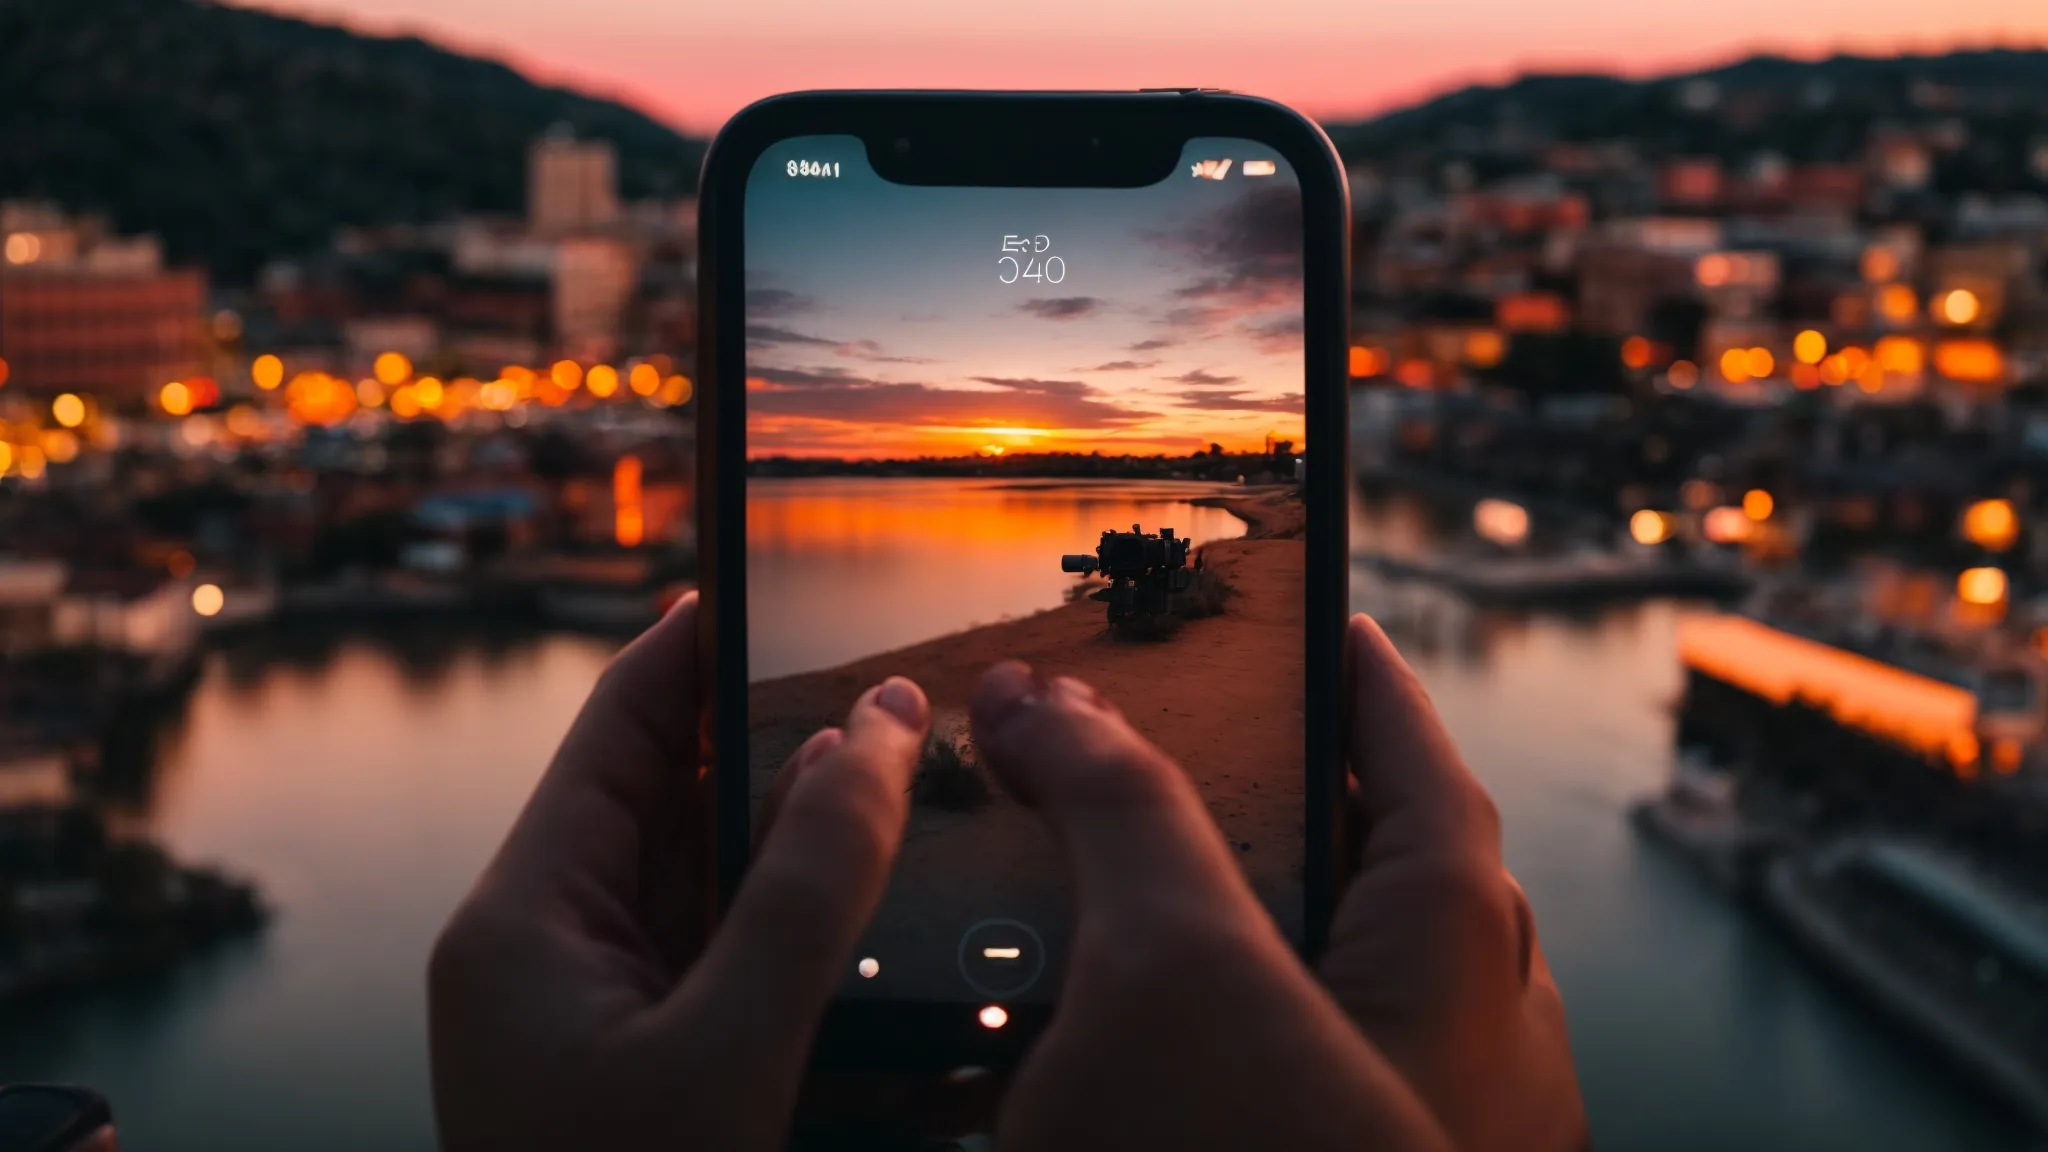 a young person eagerly holding their smartphone, capturing a vibrant sunset scene through the snapchat app.